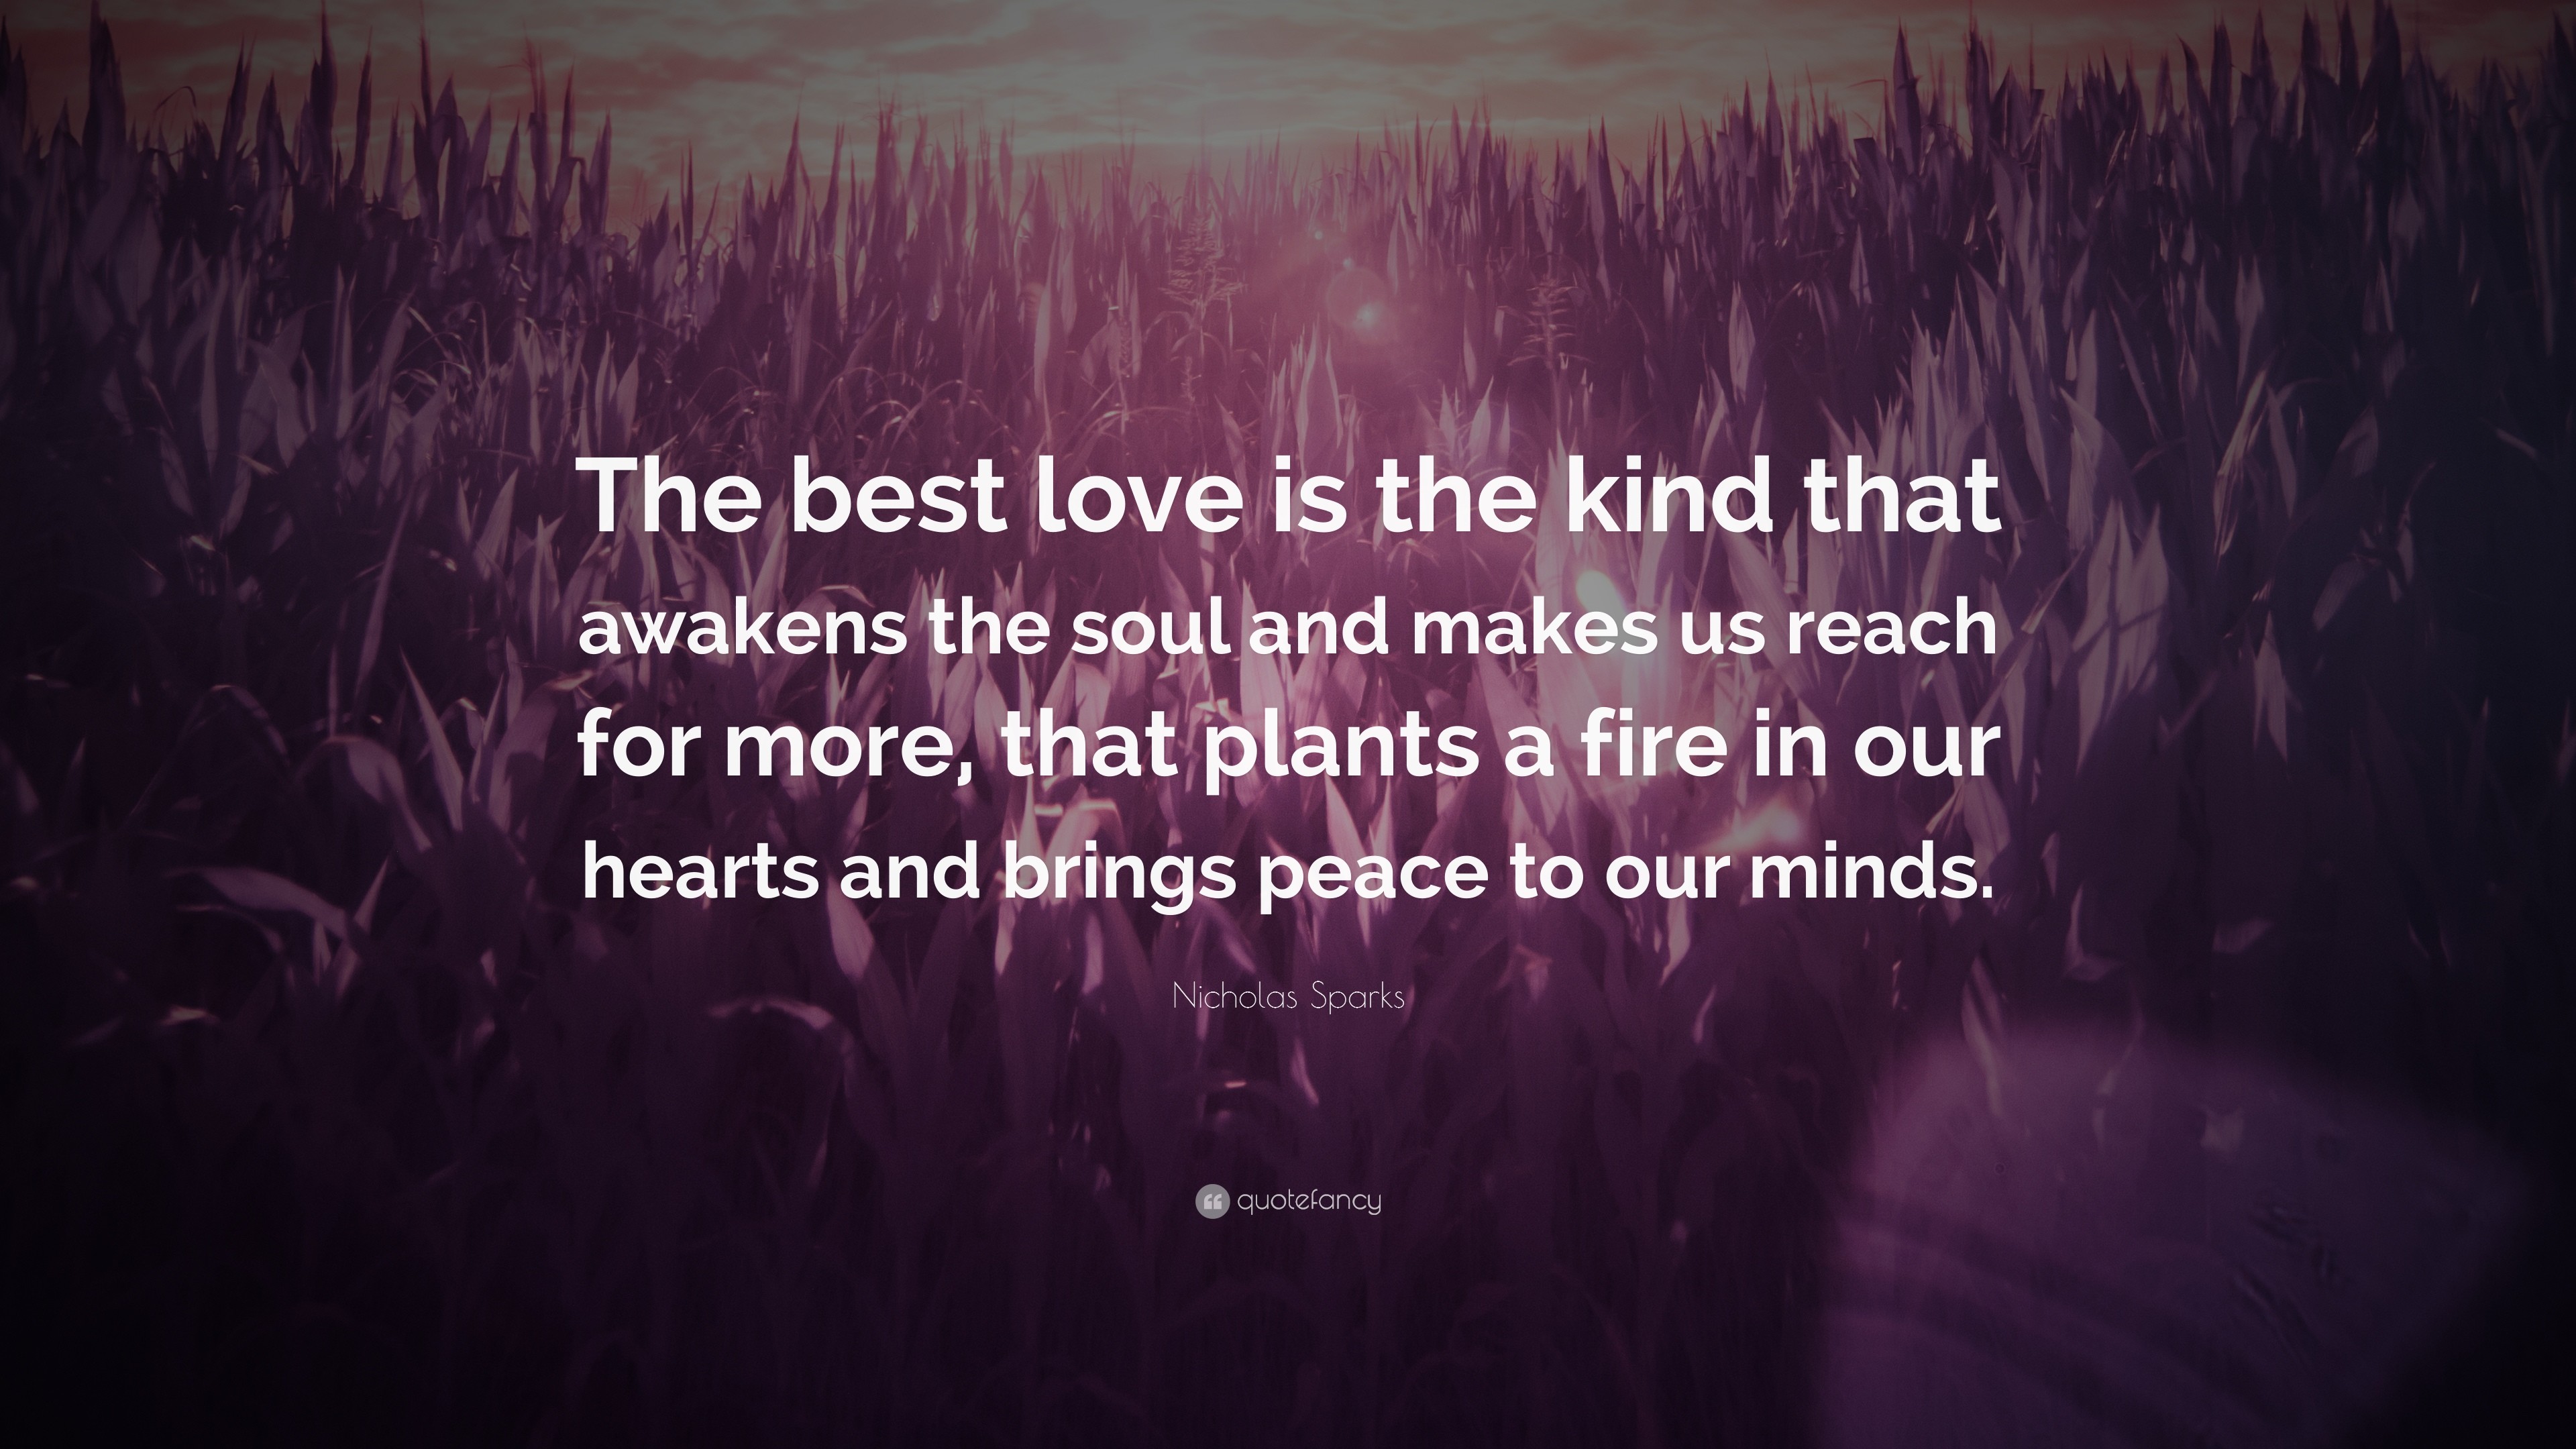 3840x2160 Nicholas Sparks Quote: “The best love is the kind that awakens the soul and